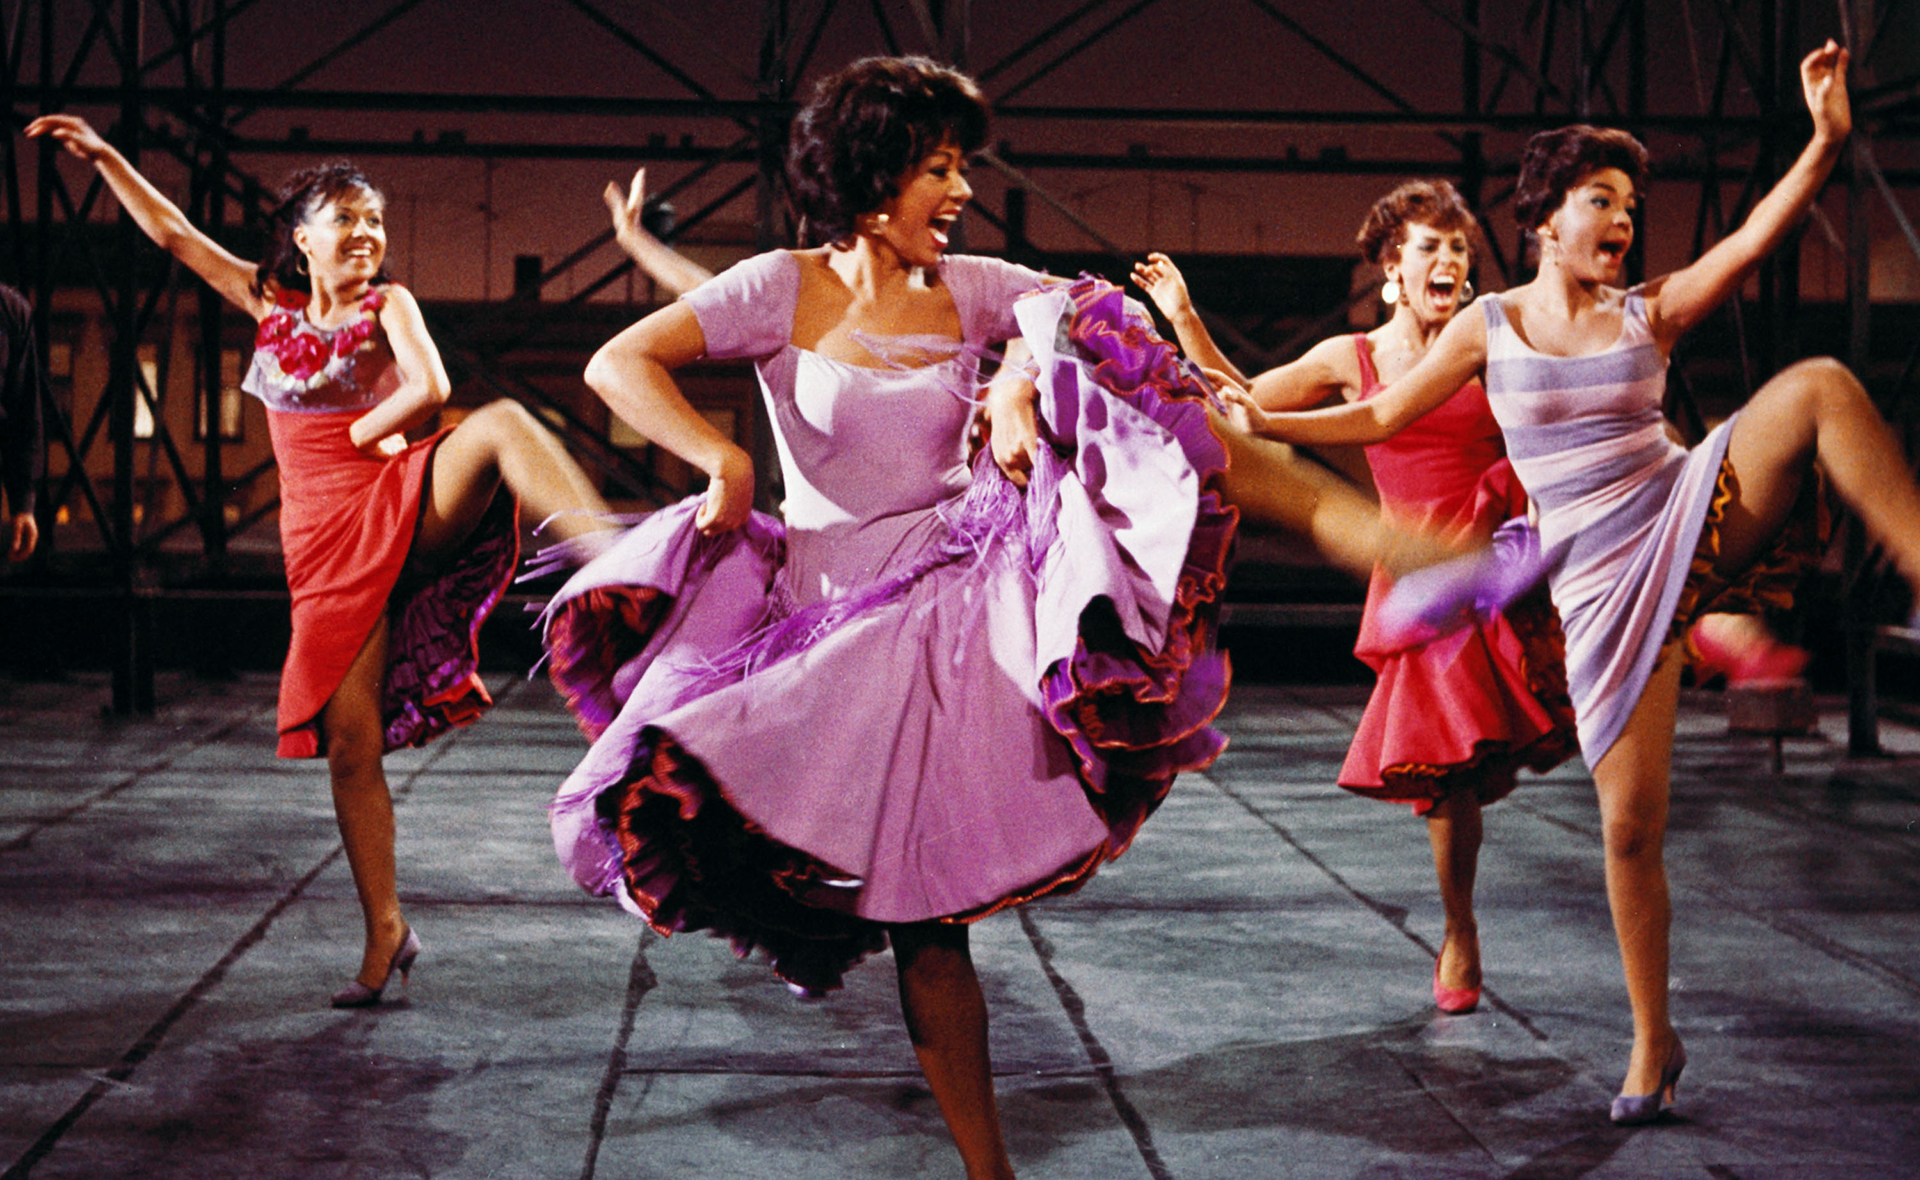 EXCLUSIVE: Why West Side Story changed everything for Rita Moreno after years in Hollywood “blackface”